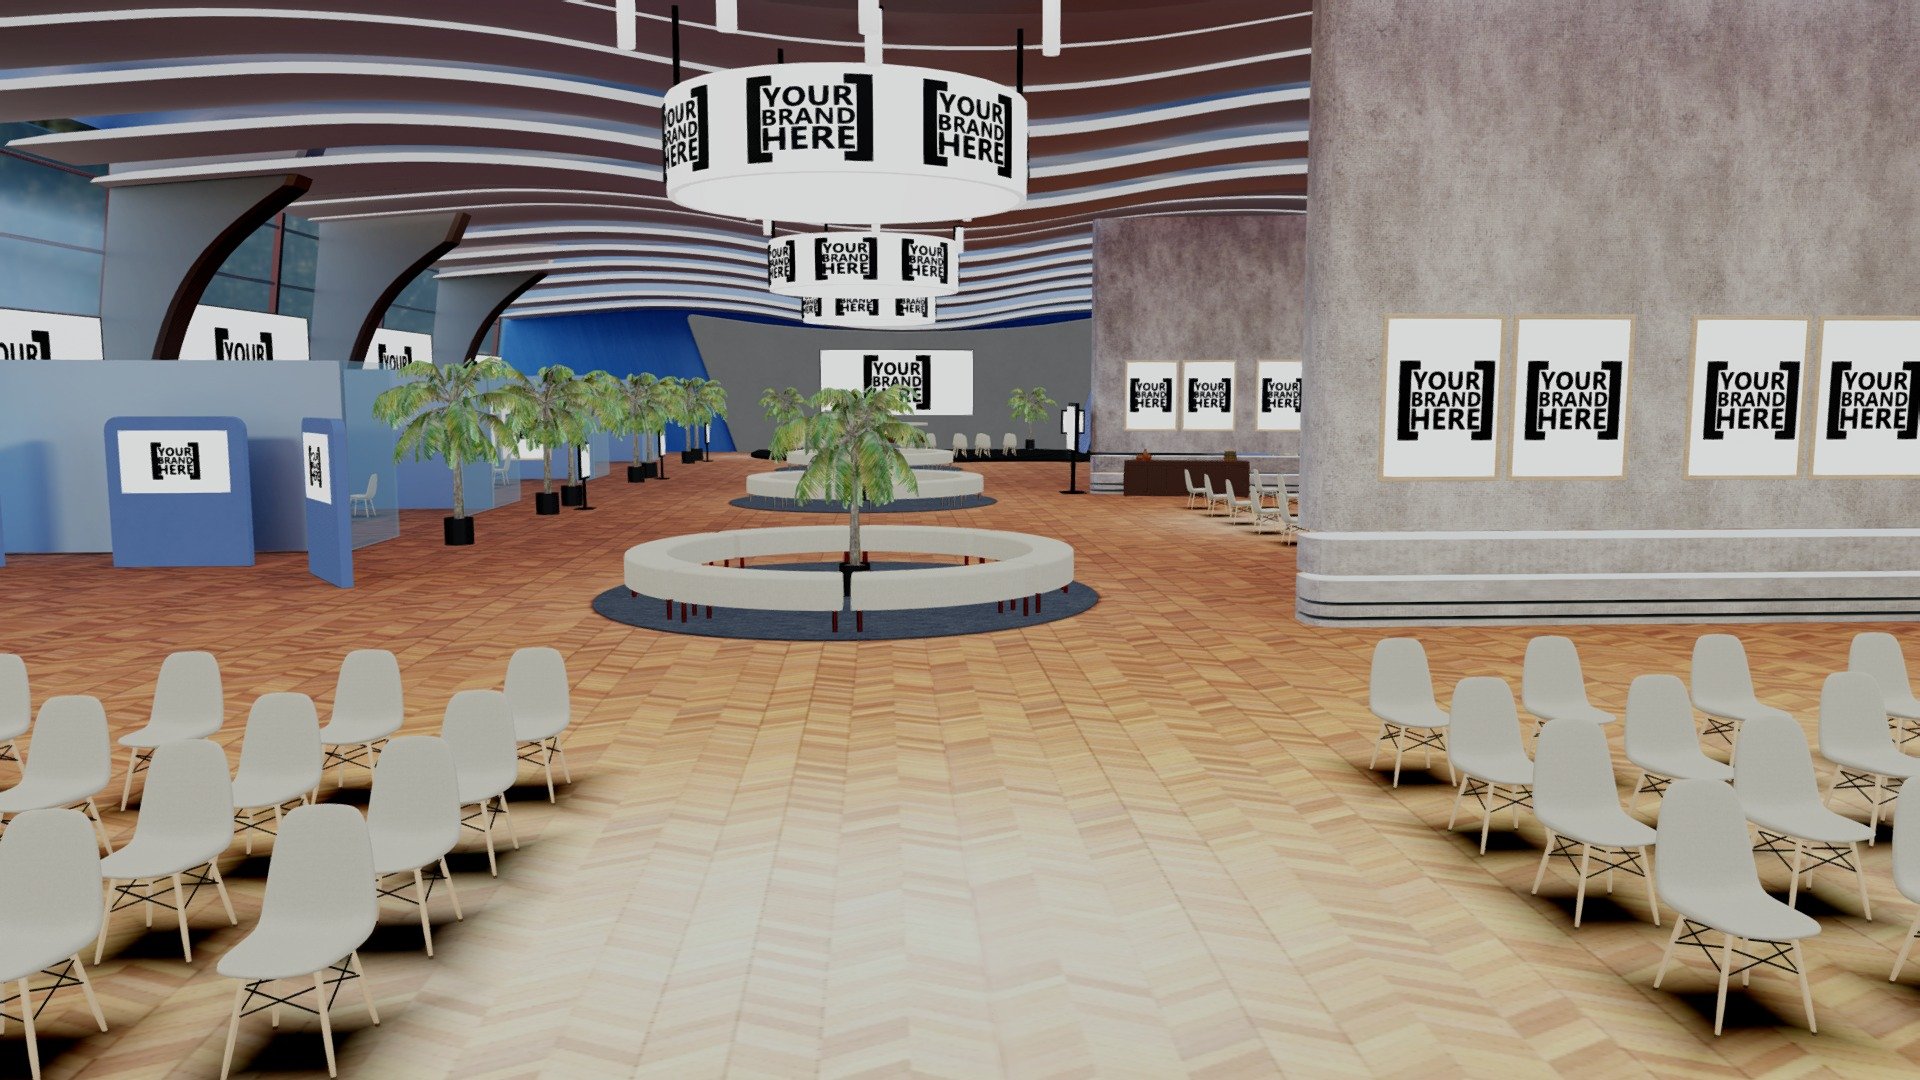 It is an exhibition center, with several screens and spaces for meetings, created especially for virtual spaces, metaverses, conferences, product sales, among other functions, with large spaces to showcase your best ideas in the digital world.

Try our space in Spatial before you buy it (FREE)  https://www.spatial.io/s/Office-Marco-Virtual-64474dbece8f256cd88144f6?share=9018447698145743520

Visit our new website: https://www.marcovirtual-mx.com/

Modeling/Baking: Blender - Metaverse exhibition center |Baked| VR/AR Ready - Buy Royalty Free 3D model by Marco Virtual (@marco_virtual) 3d model